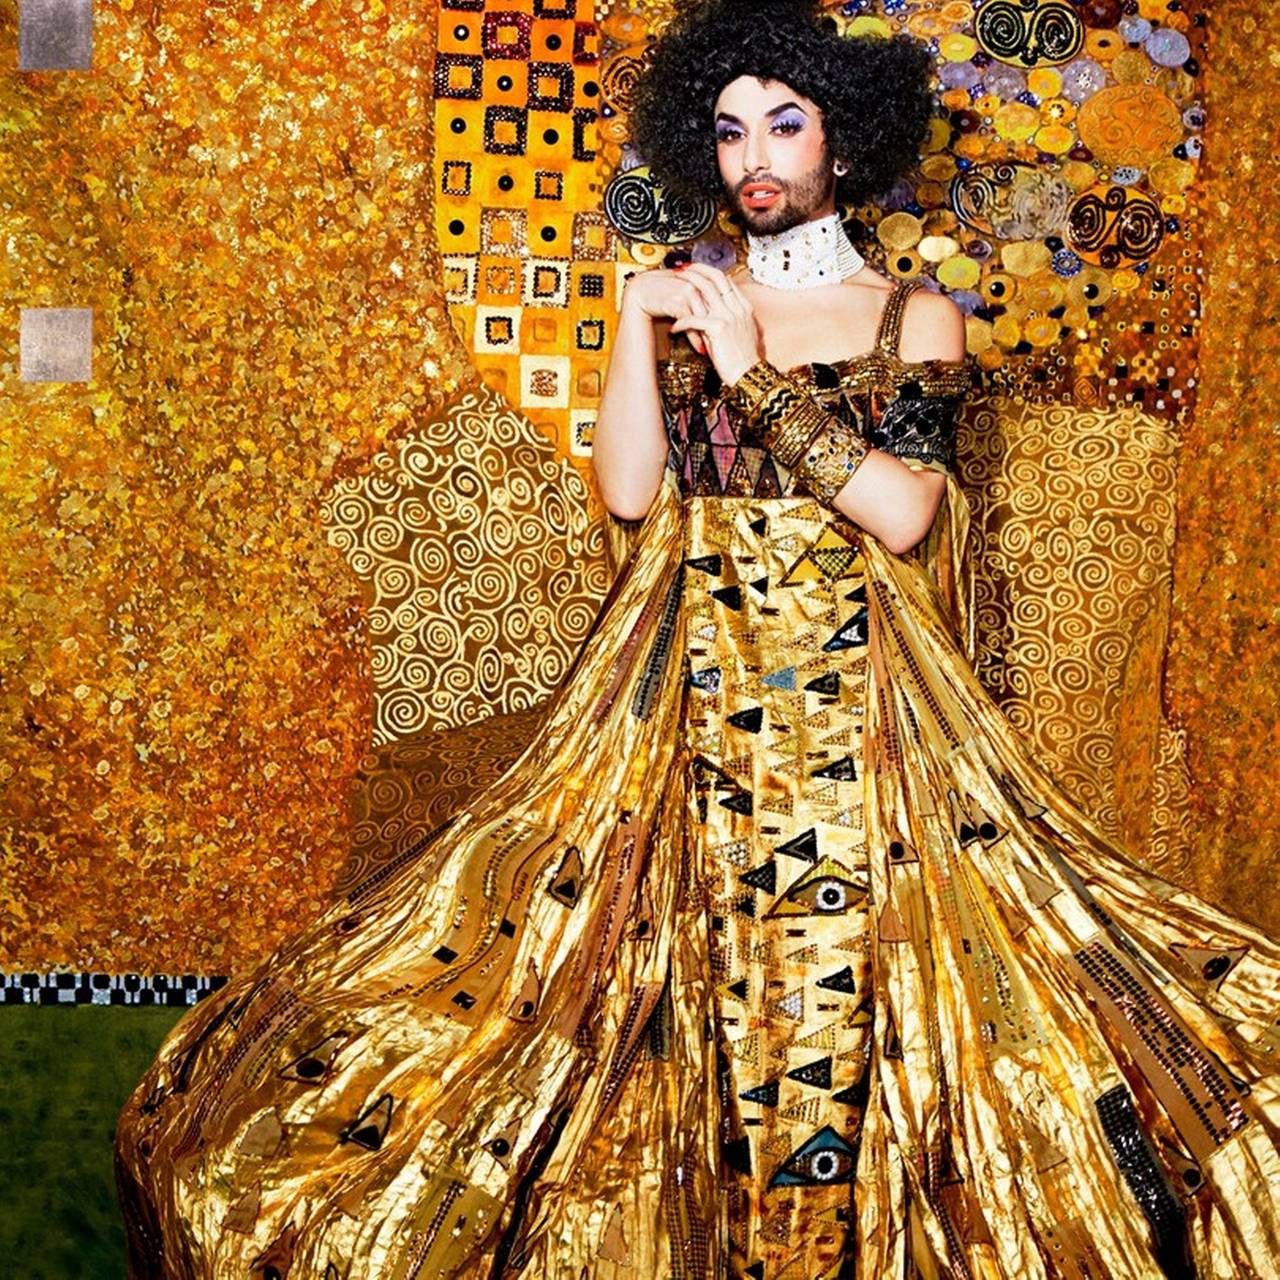 Art nouveau masterpiece the „Goldene Adele“ by Gustav Klimt interpreted with a portrait of Austrian singer and drag queen Conchita.

PREISS FINE ARTS is one of the world’s leading galleries for fine art photography representing the most famous